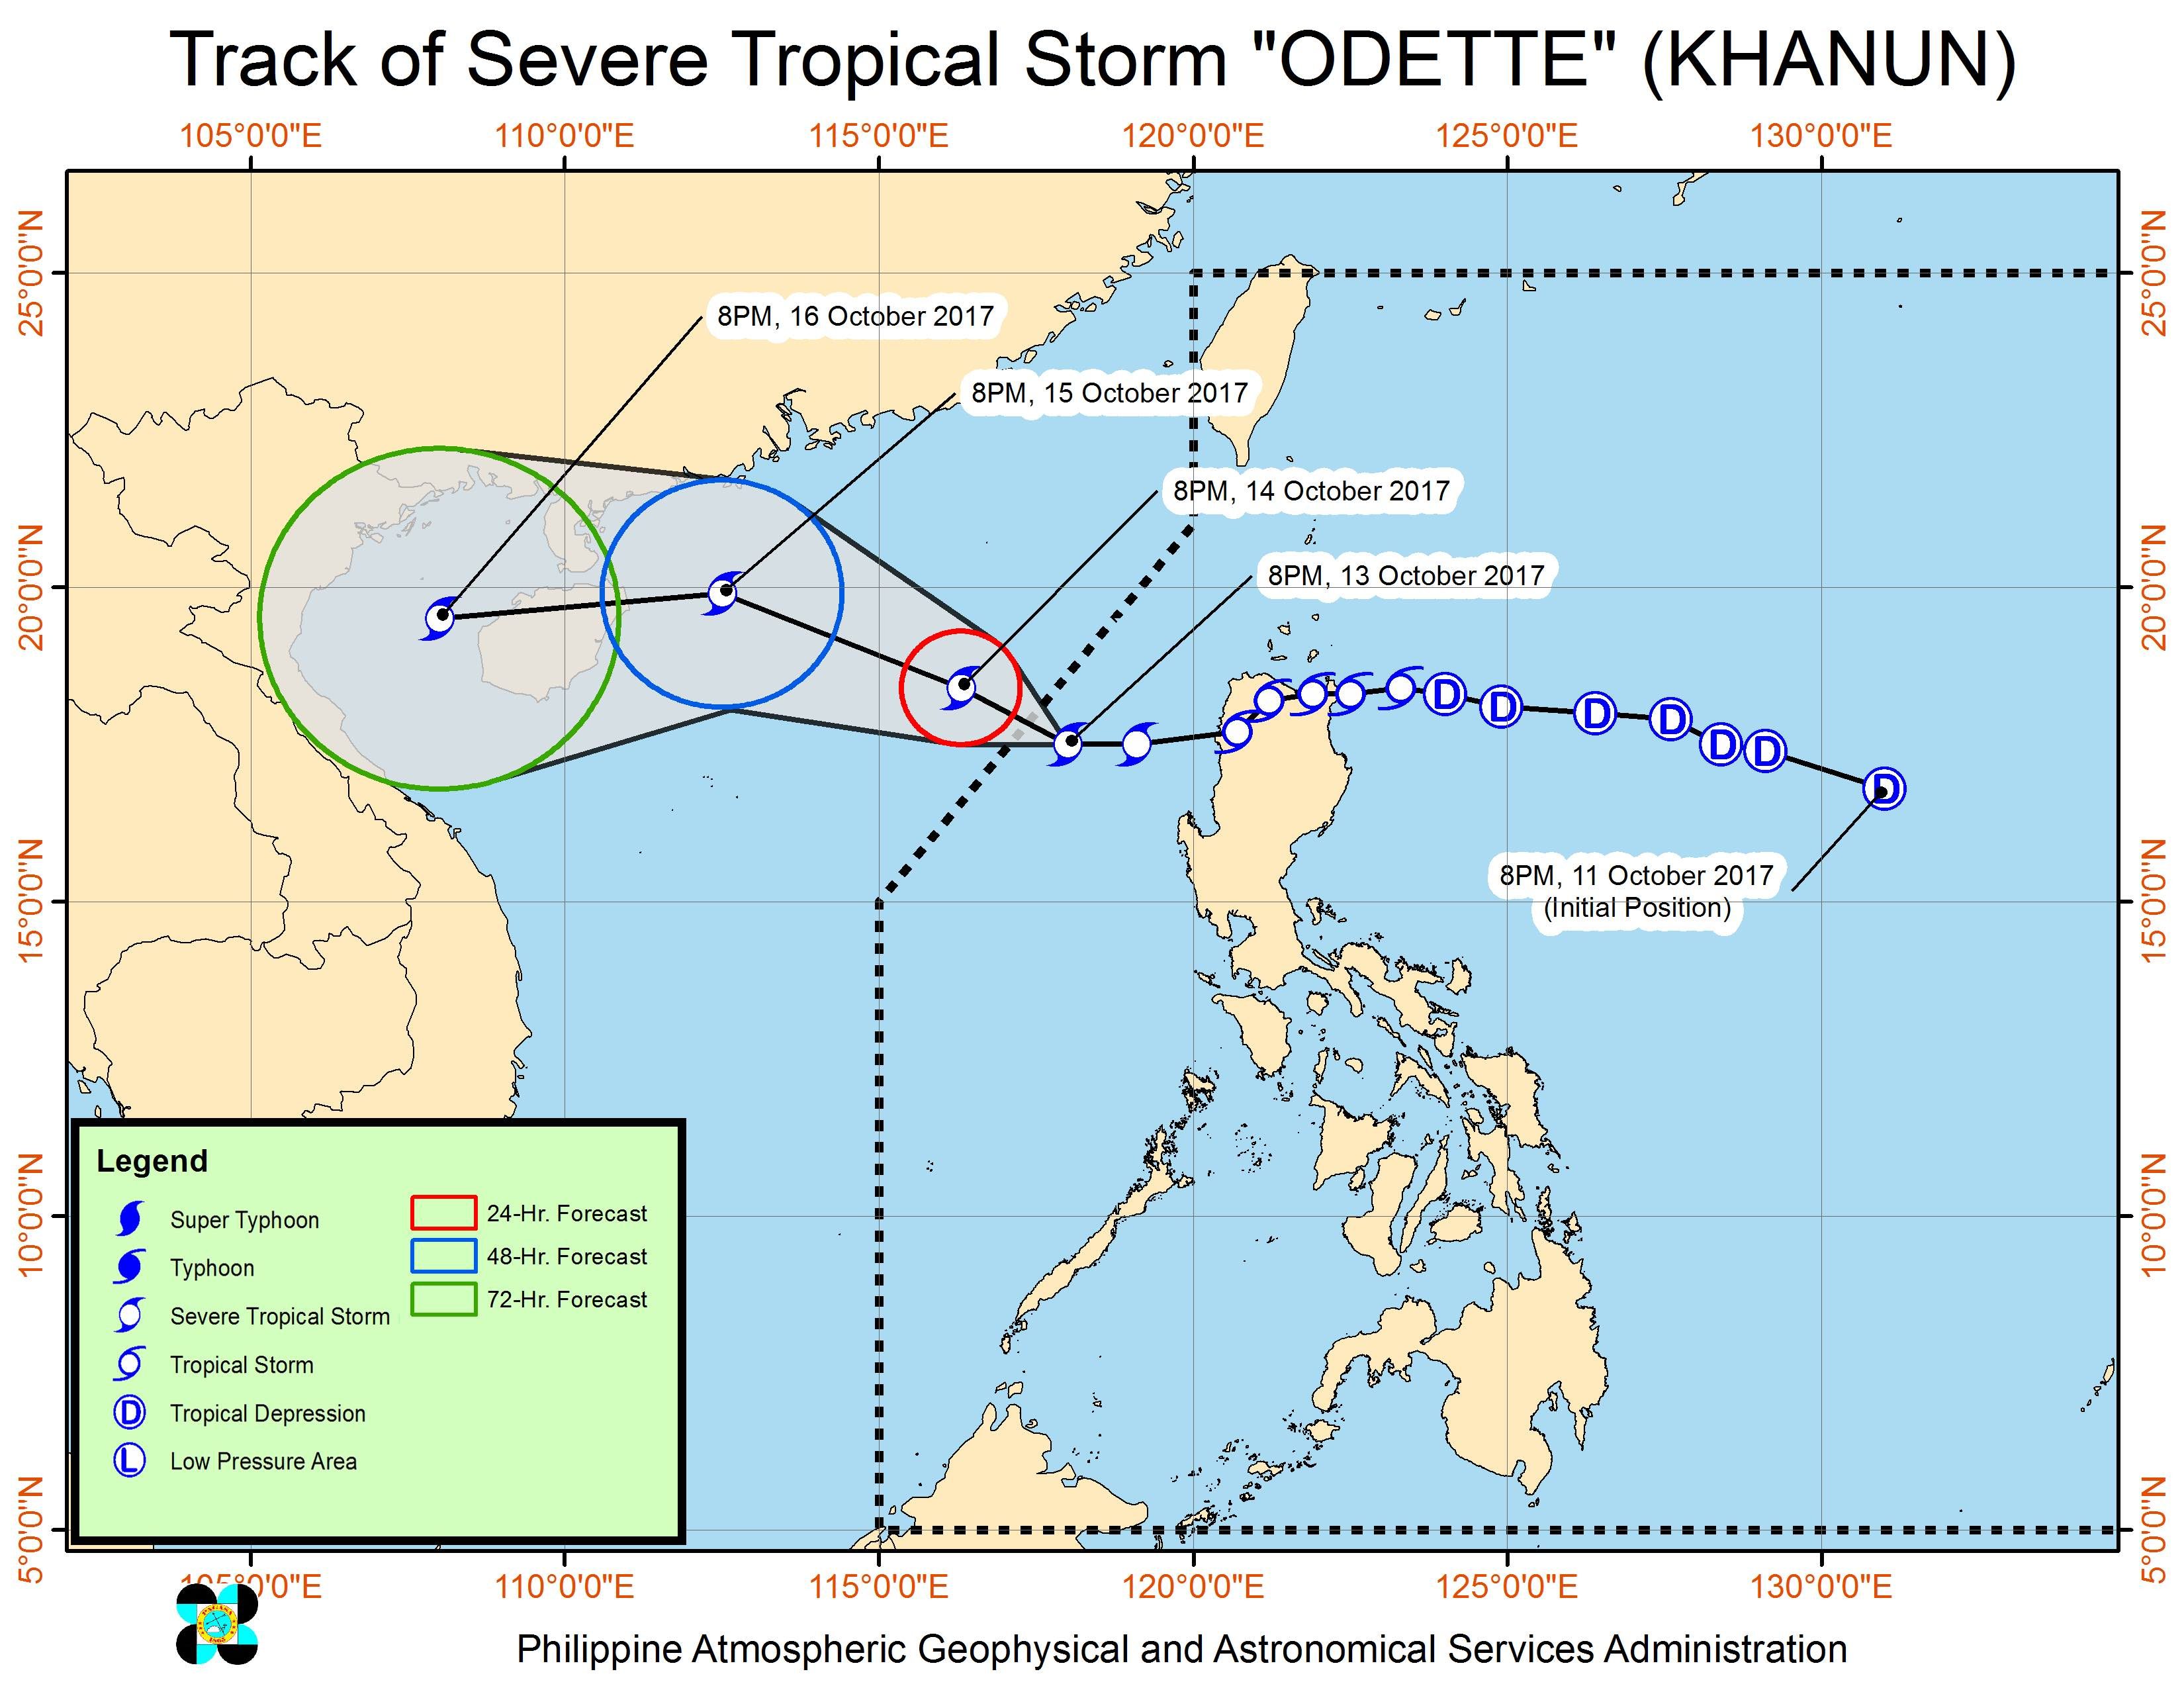 Forecast track of Severe Tropical Storm Odette as of October 13, 11 pm. Image courtesy of PAGASA 